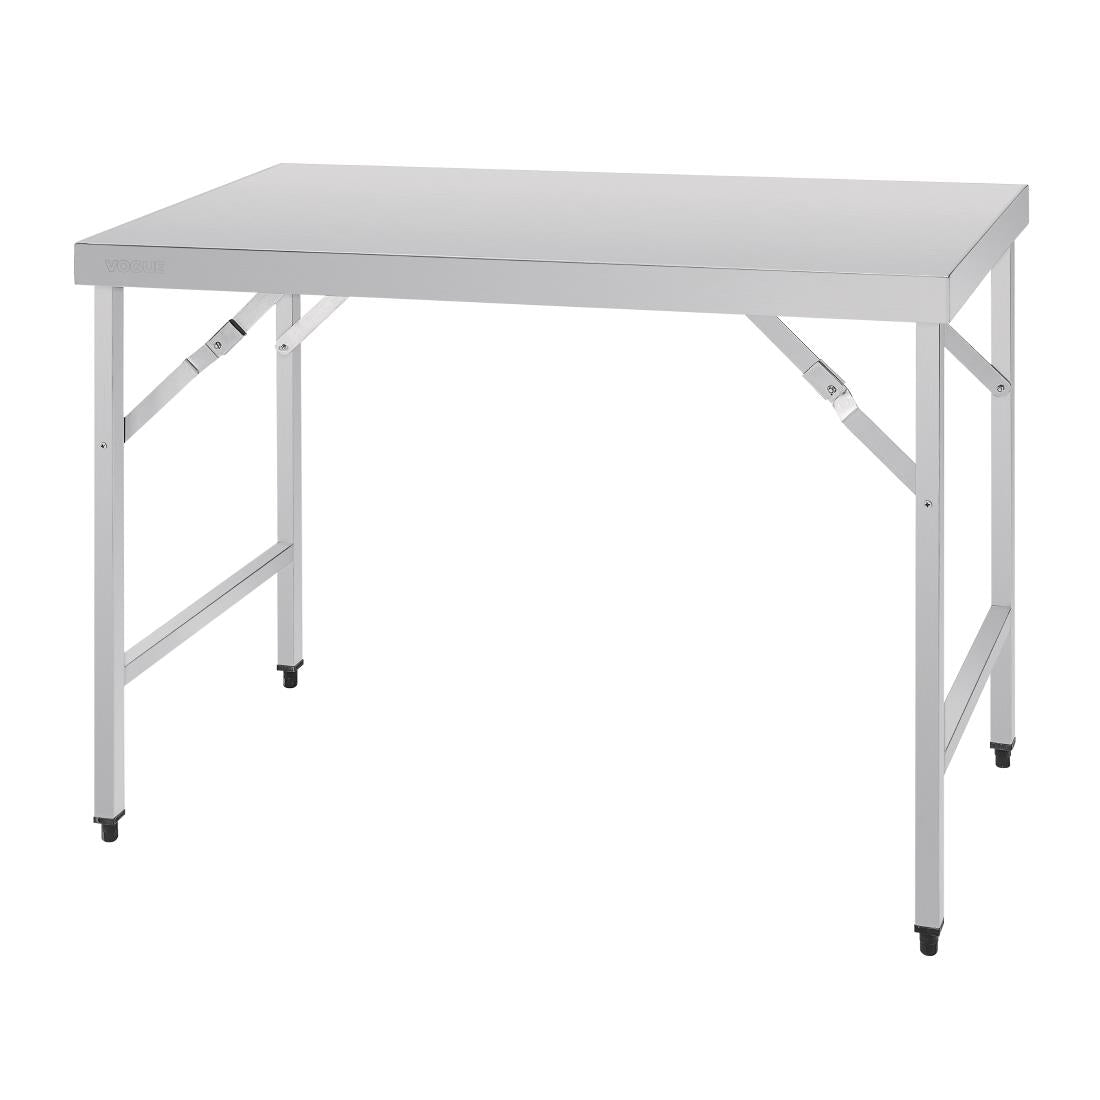 CB905 Vogue Stainless Steel Folding Table 1200mm JD Catering Equipment Solutions Ltd